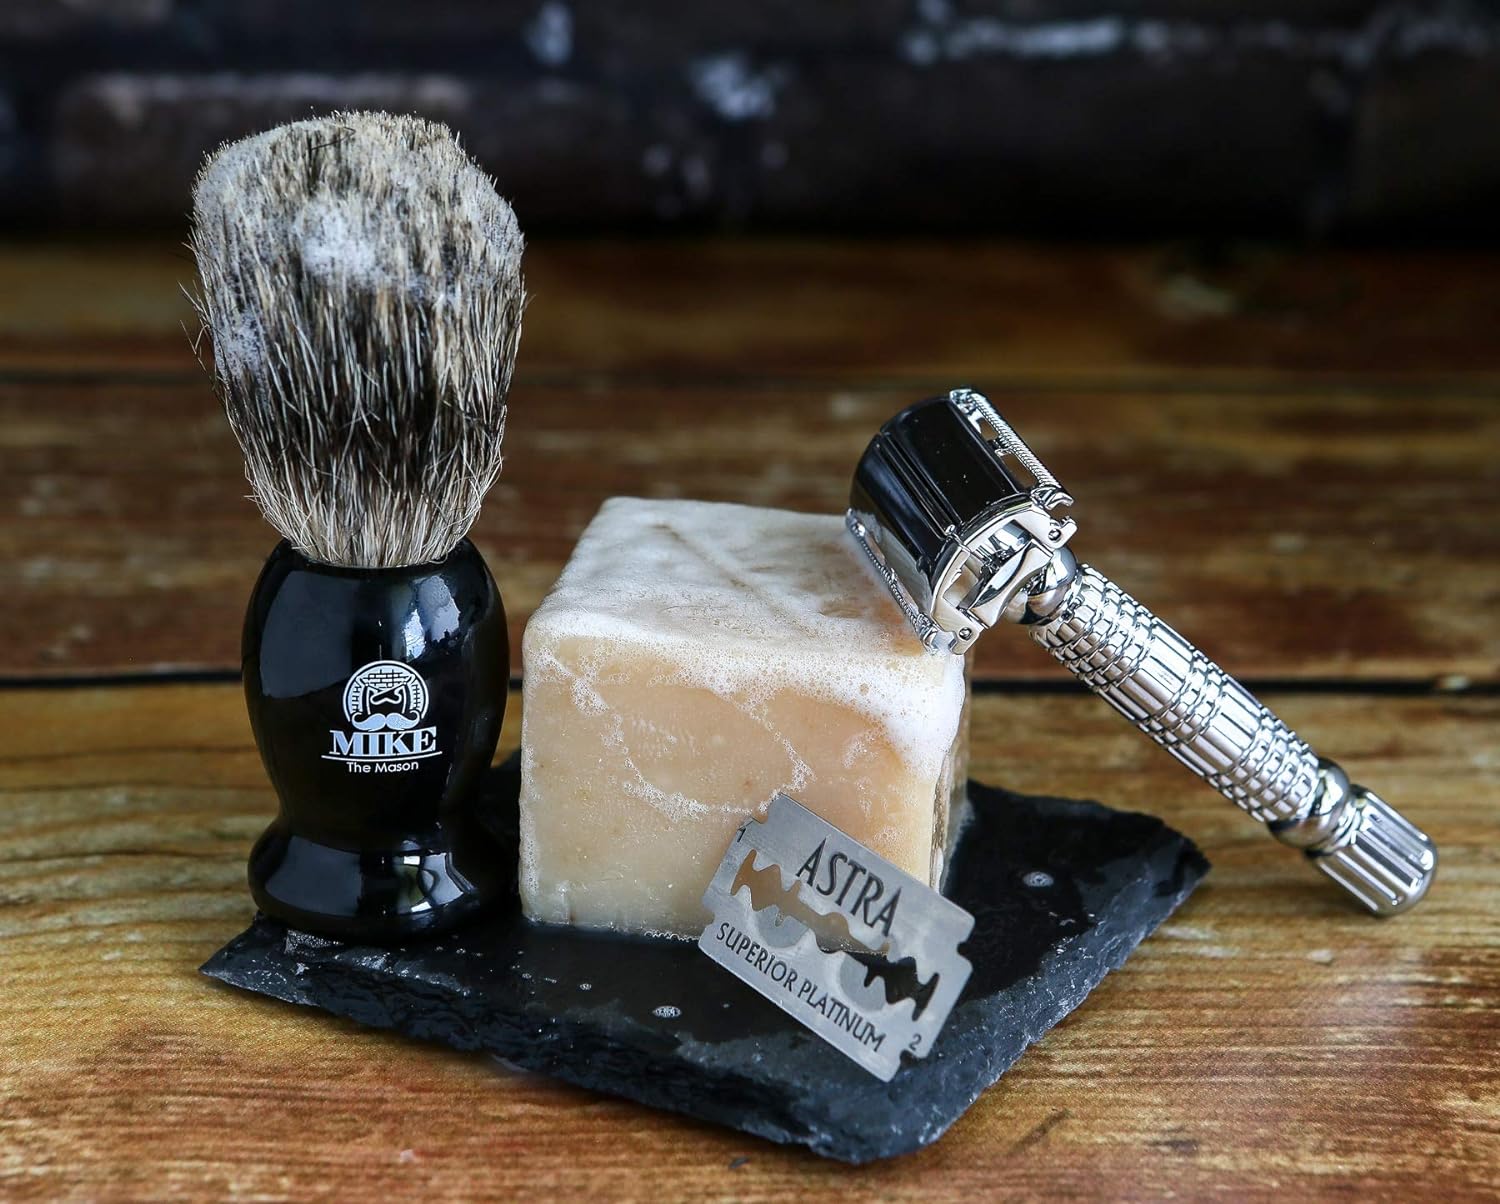 Complete Wet Shave Kit | Mike the Mason | Gift Set Includes: Hawk Safety Razor, Pure 100% Badger Hair Brush, Organic Honey Oatmeal Shave Bar, Nick Brick, 5 Premium Mens Blades, and a Razor Stand